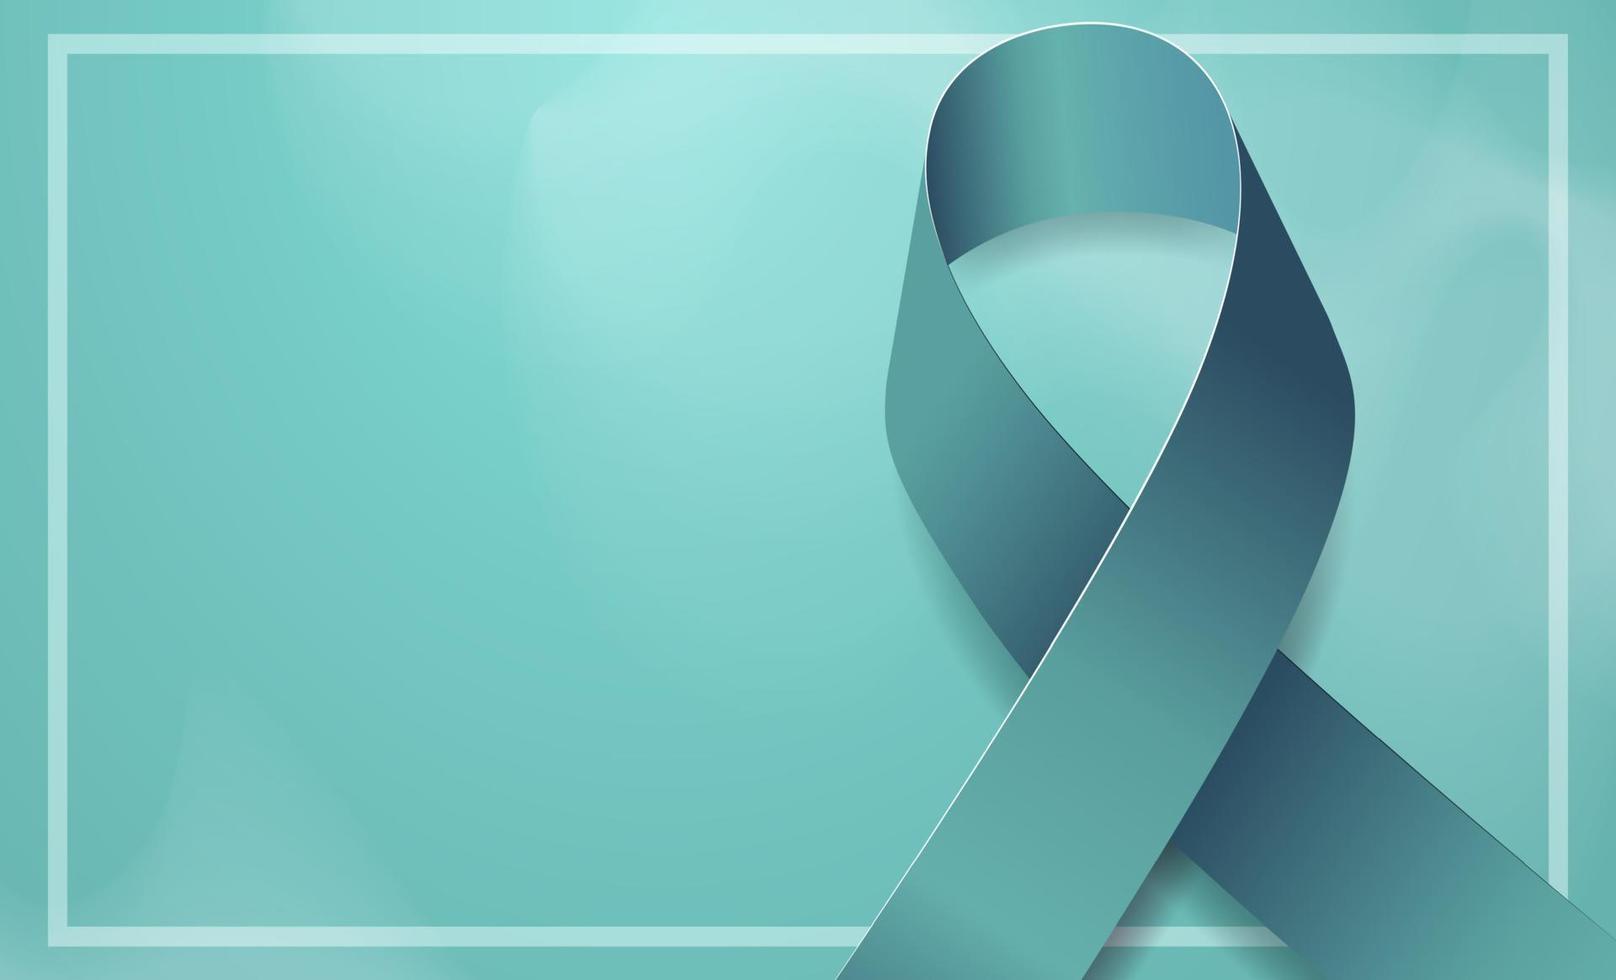 Sexsual assault awareness month concept. Banner template with teal ribbon. Vector illustration.